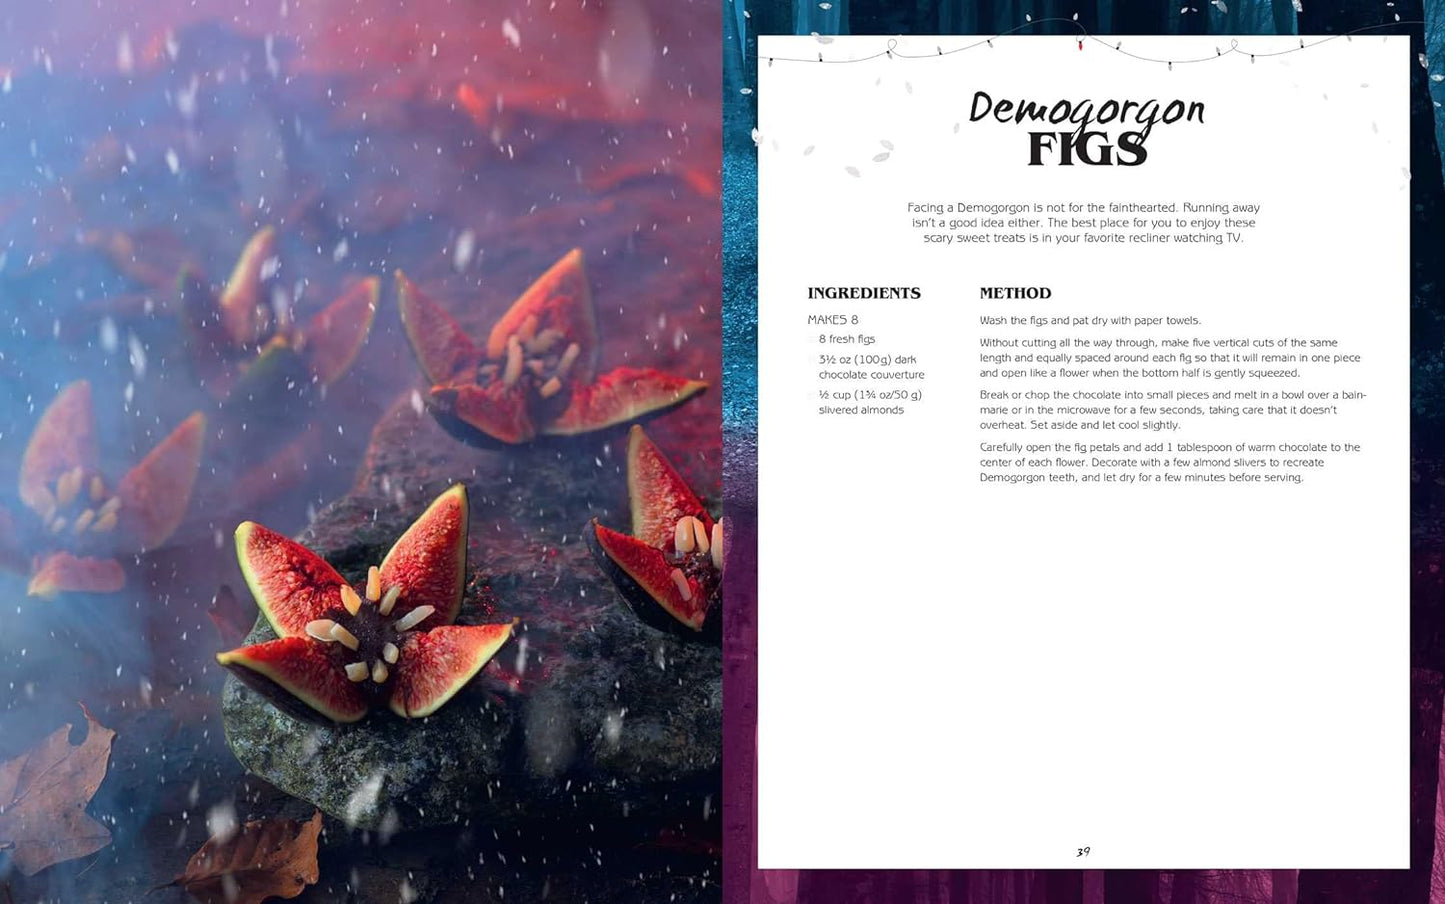 A two-page spread from the book. On the left are figs decorated to look like the faces of a demogorgon monster. On the right is a recipe for demogorgon figs.